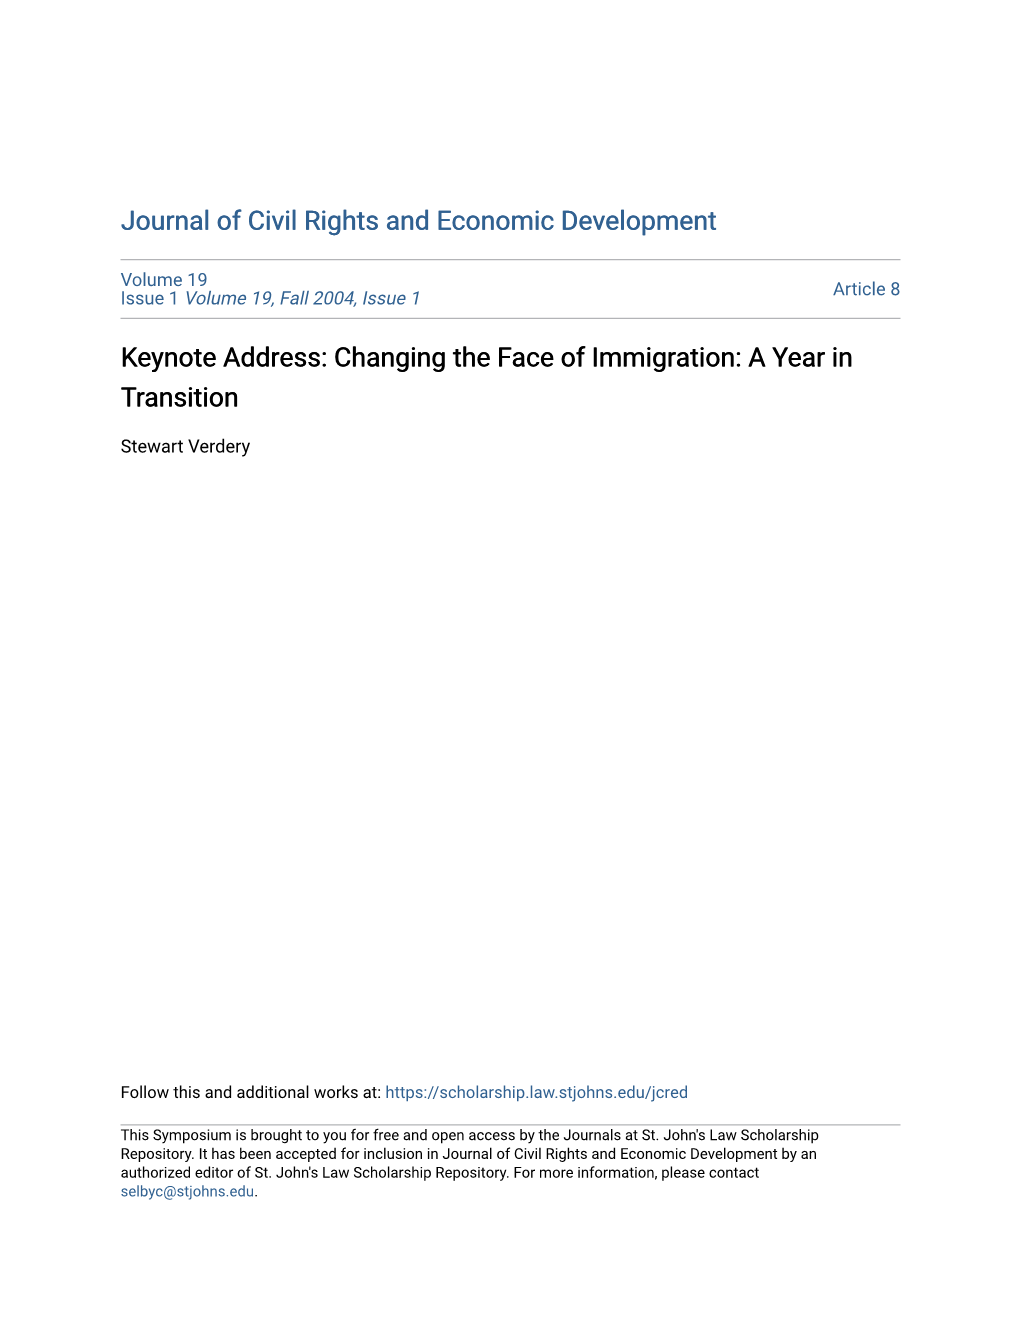 Keynote Address: Changing the Face of Immigration: a Year in Transition